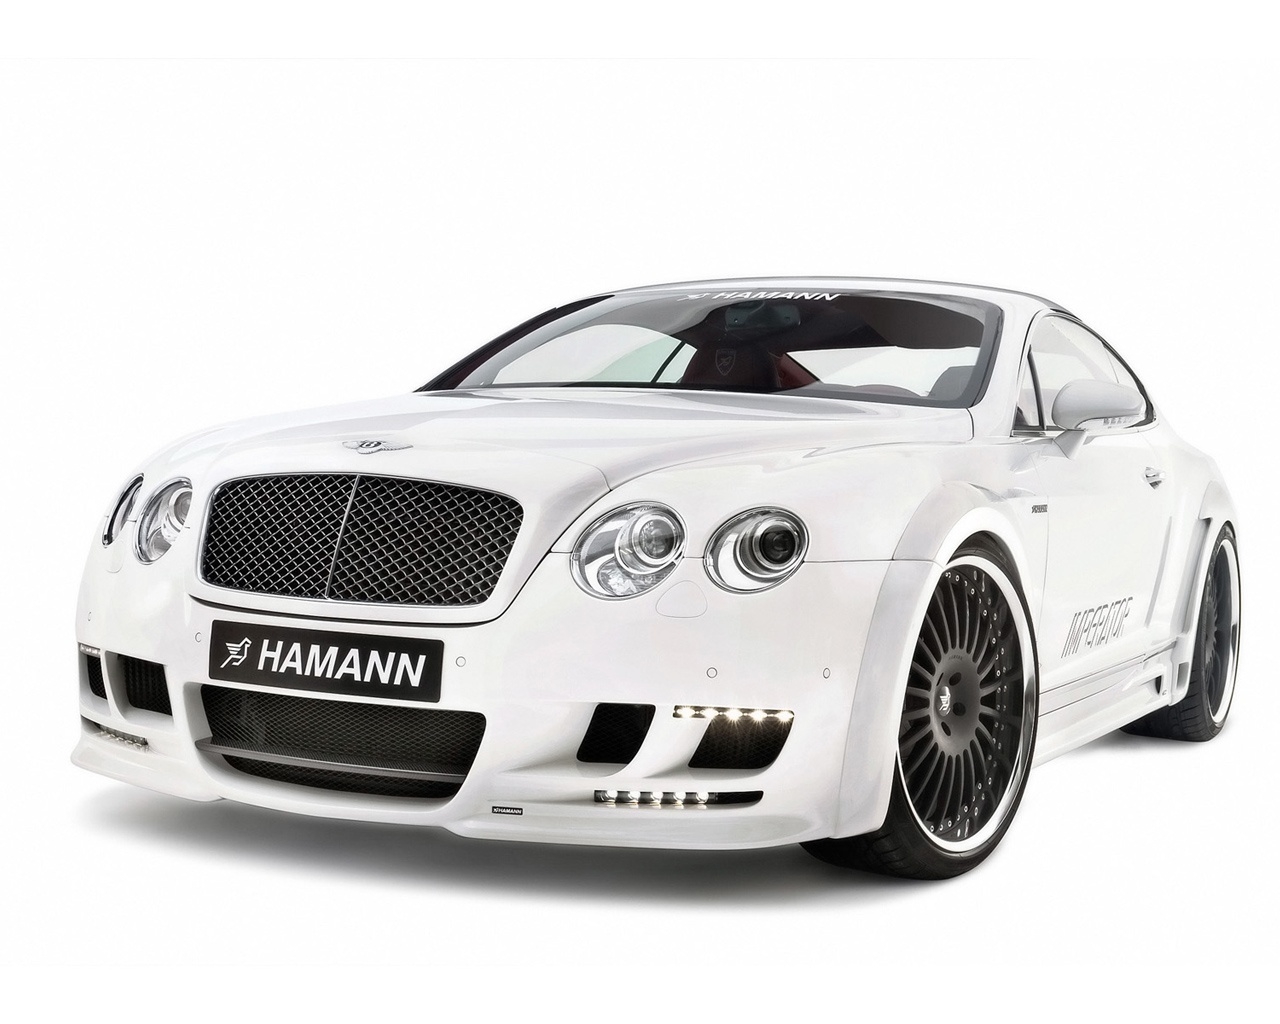 2009 Hamann Imperator based on Bentley Continental GT for 1280 x 1024 resolution